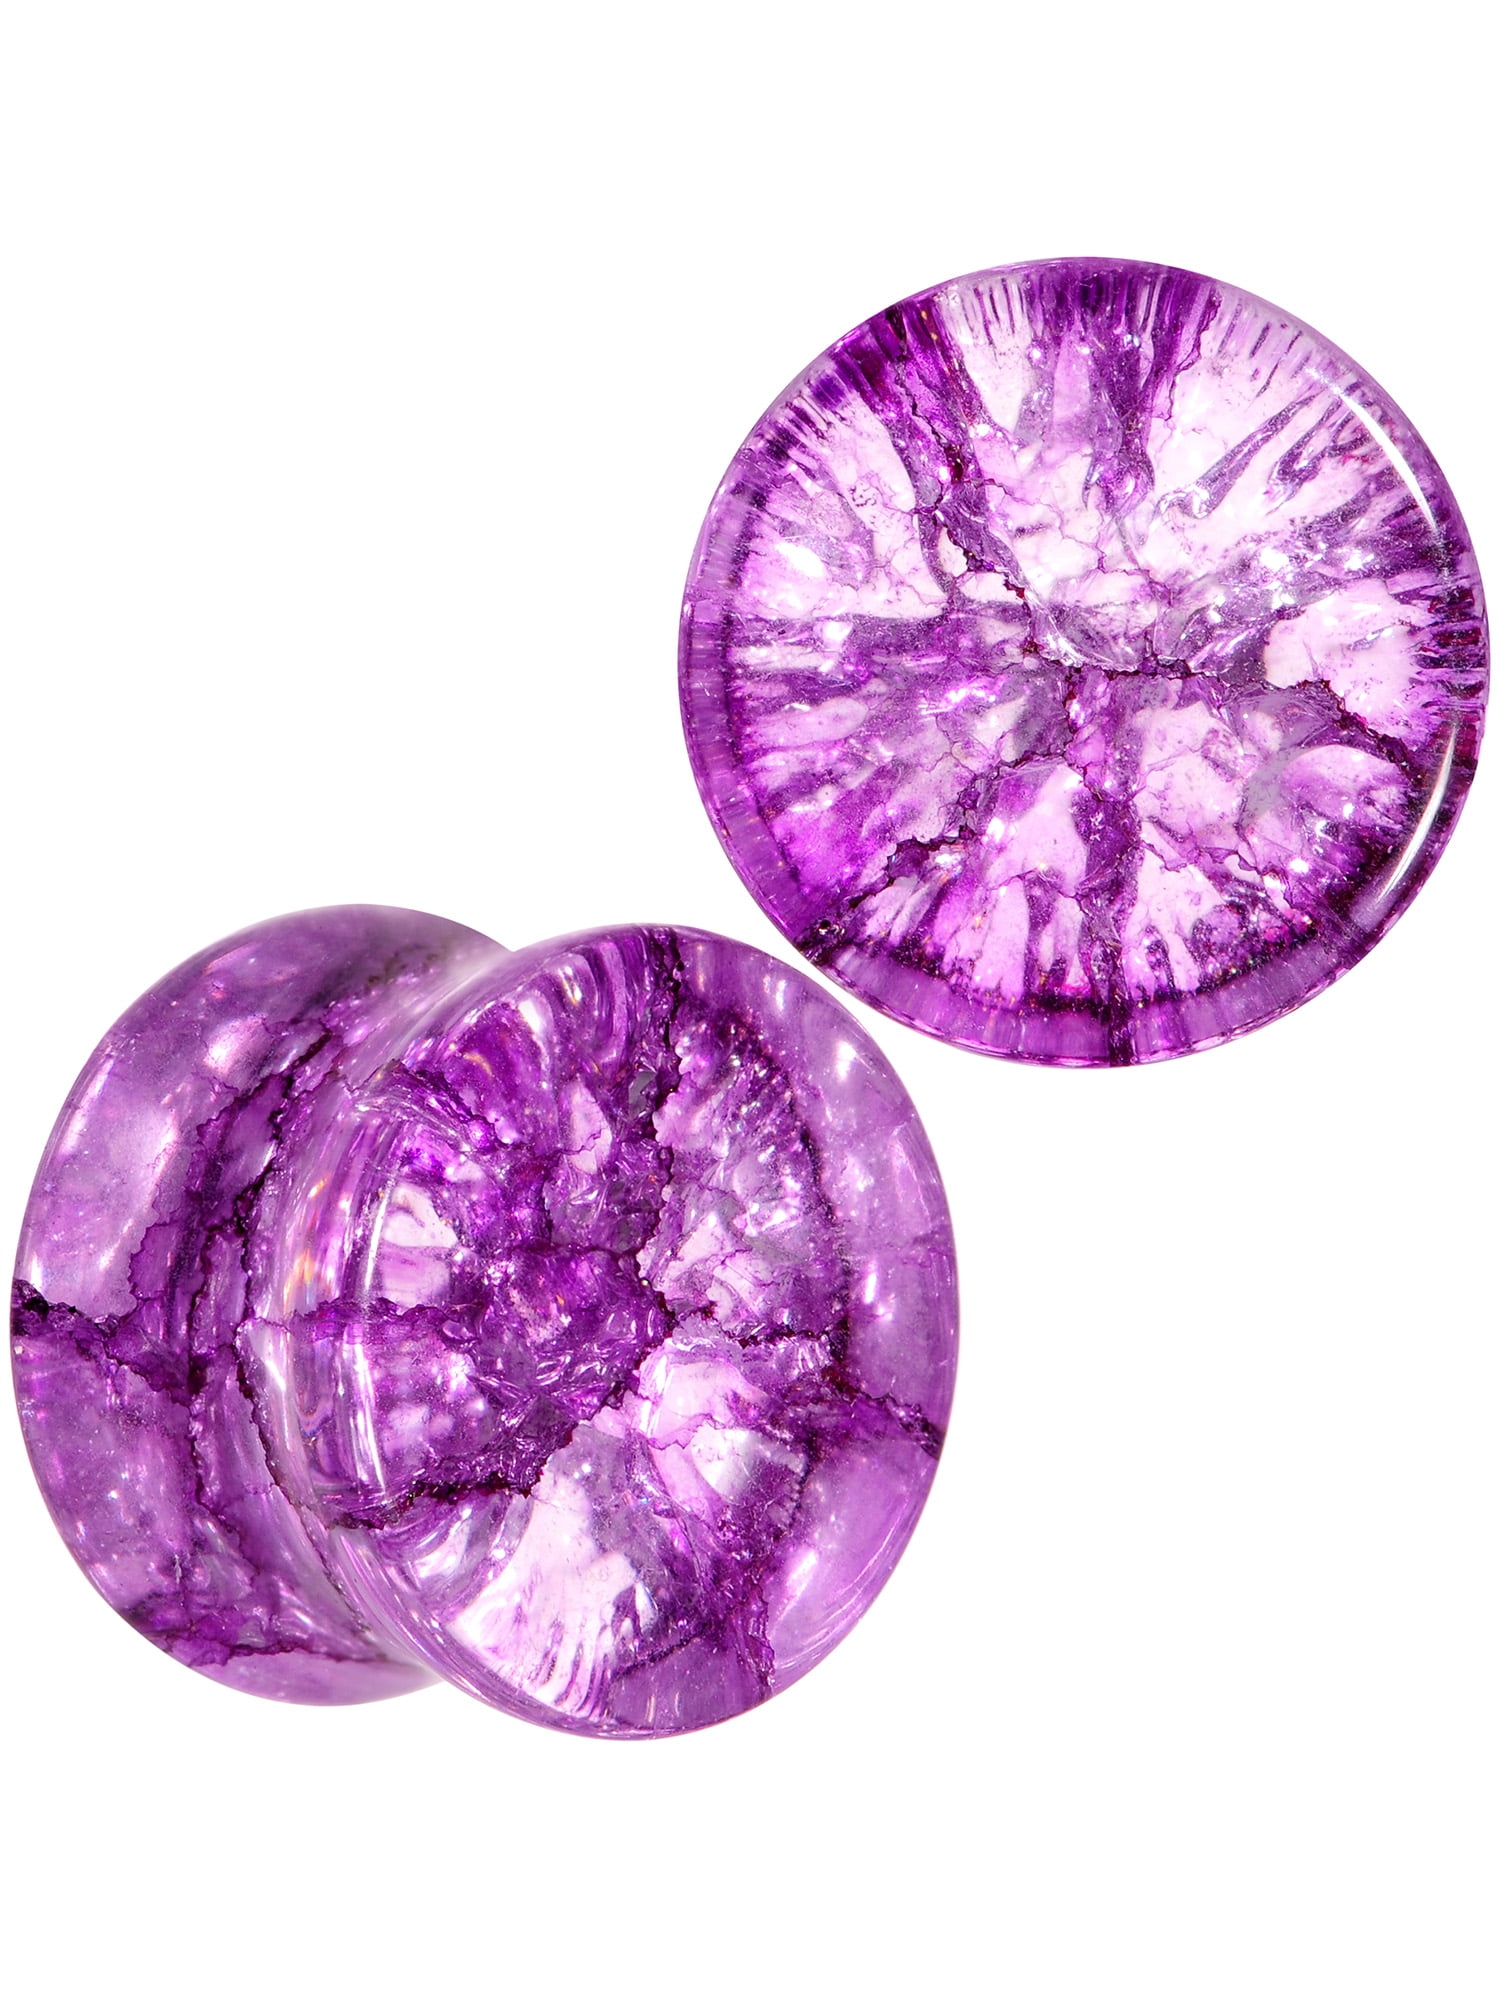 Sold as a Pair Inspiration Dezigns Purple Shattered Glass Double Flared Saddle Plugs